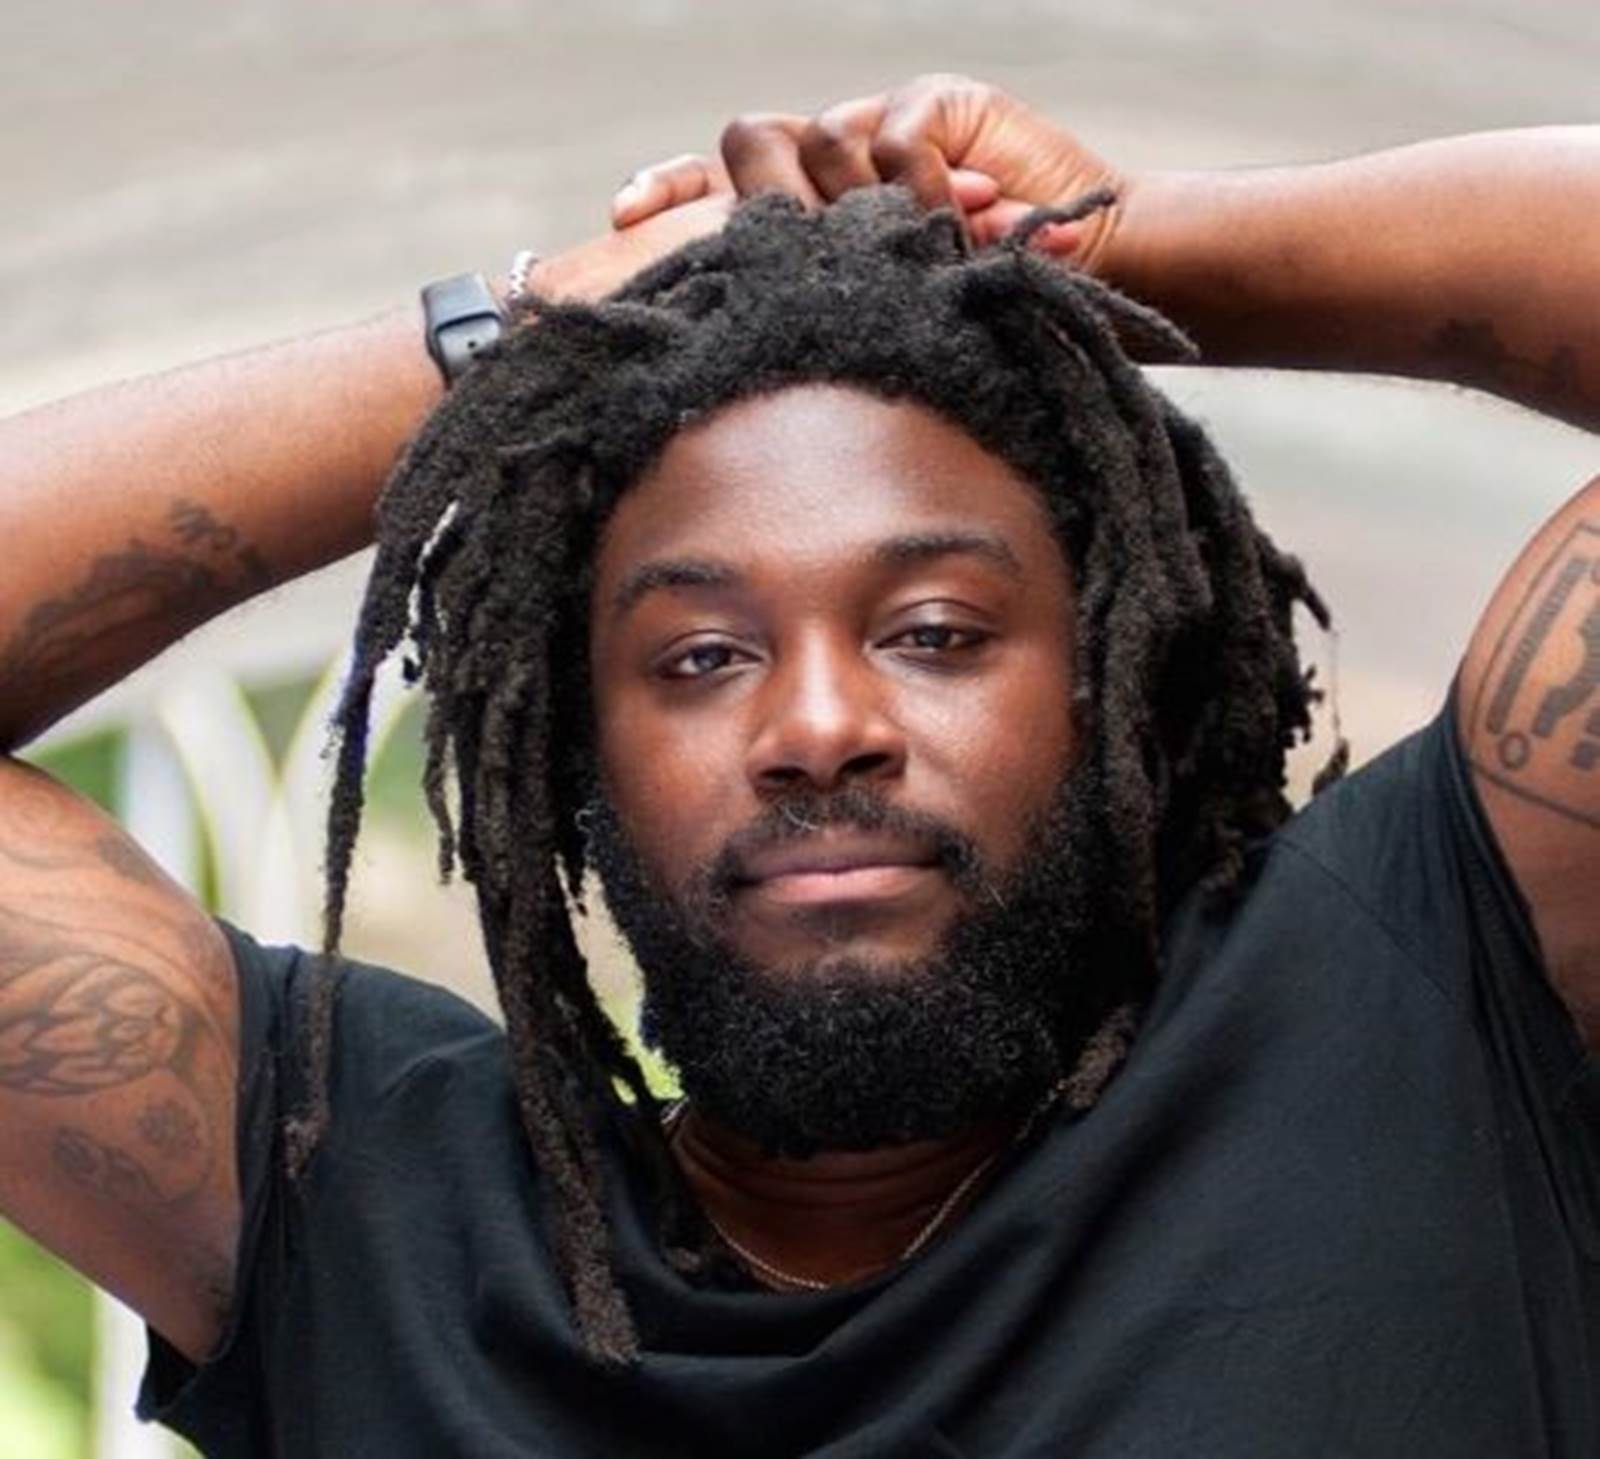 Jason Reynolds on 'Ghost' and writing about real issues for young readers